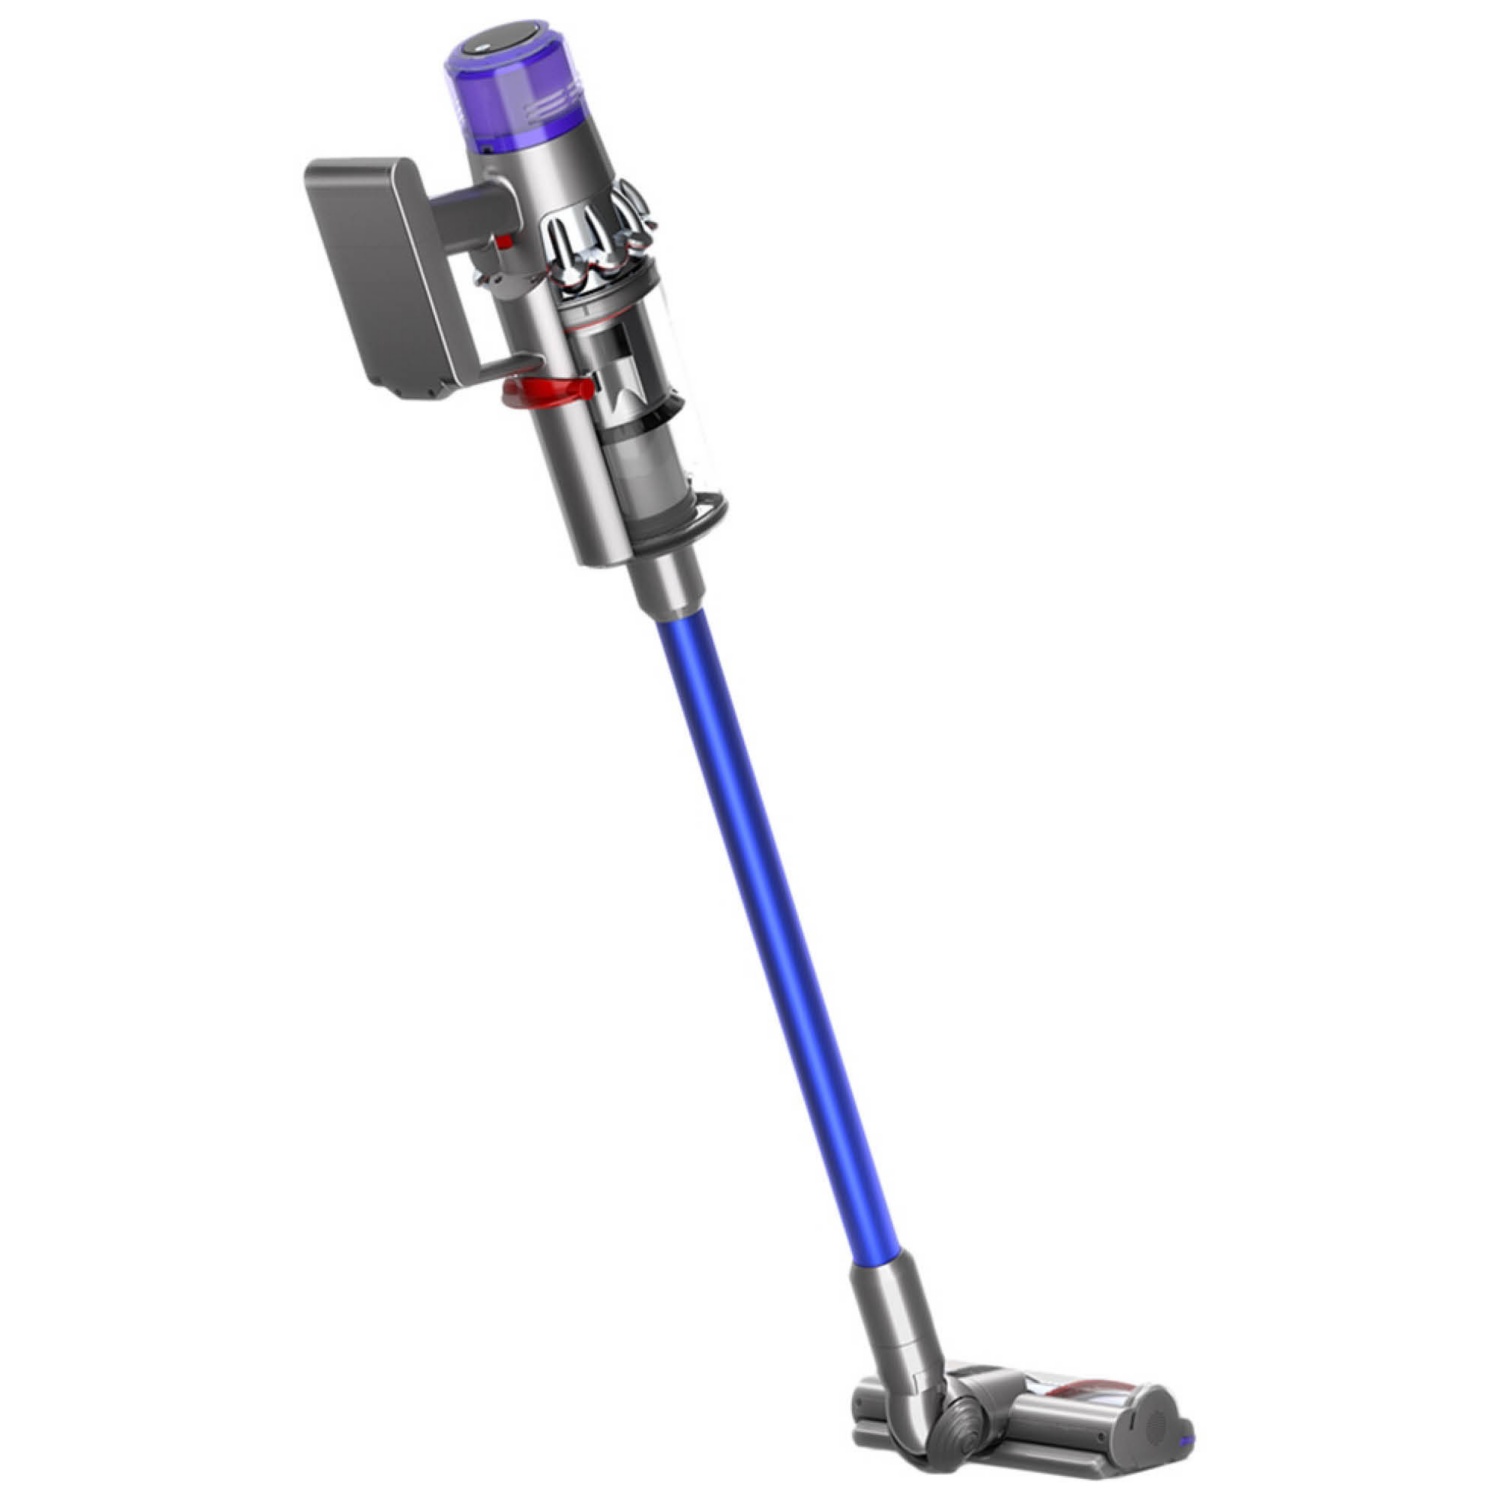 DYSON V11 Absolute